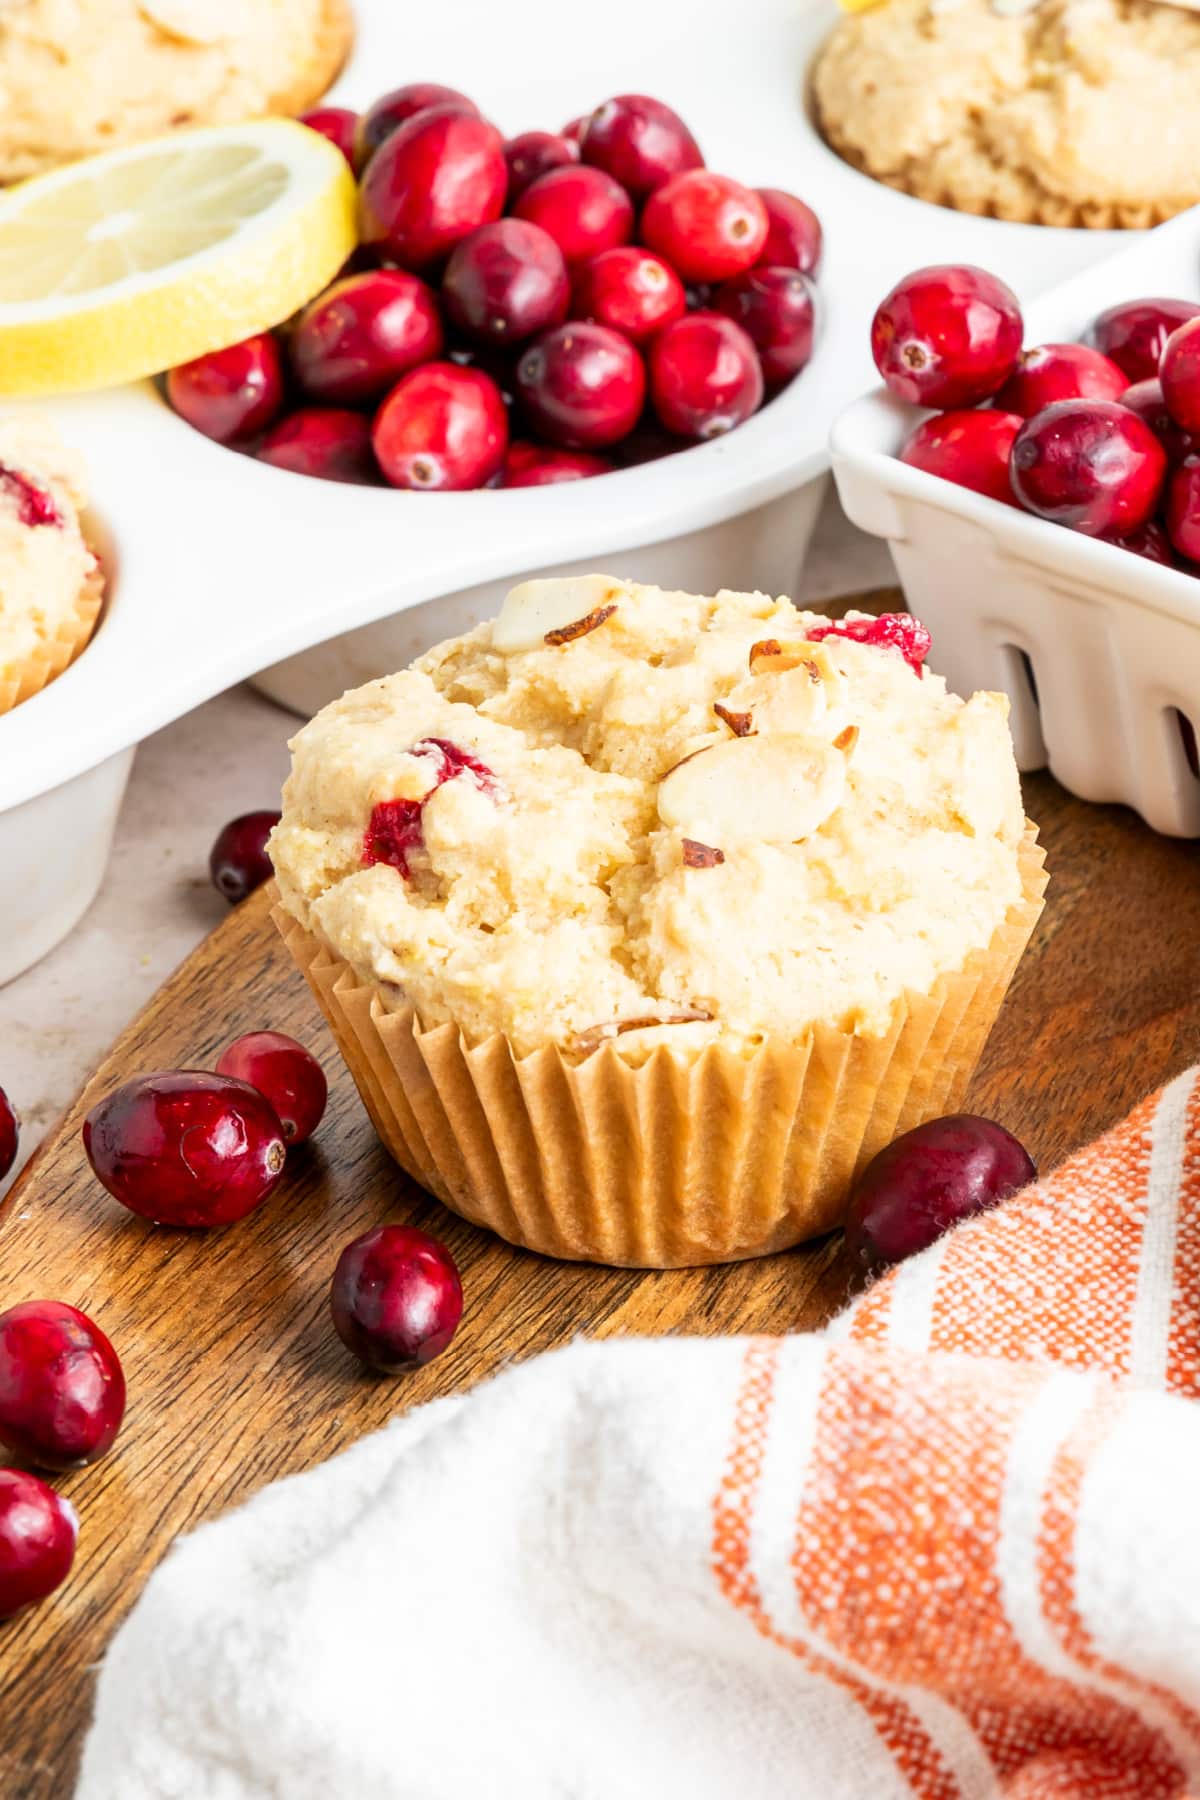 A gluten free cranberry muffin sitting on a wood board with a ceramic berry box full of fresh cranberries and an orange and white tea towel. A white muffin tin full of fresh baked muffins sits to the left.